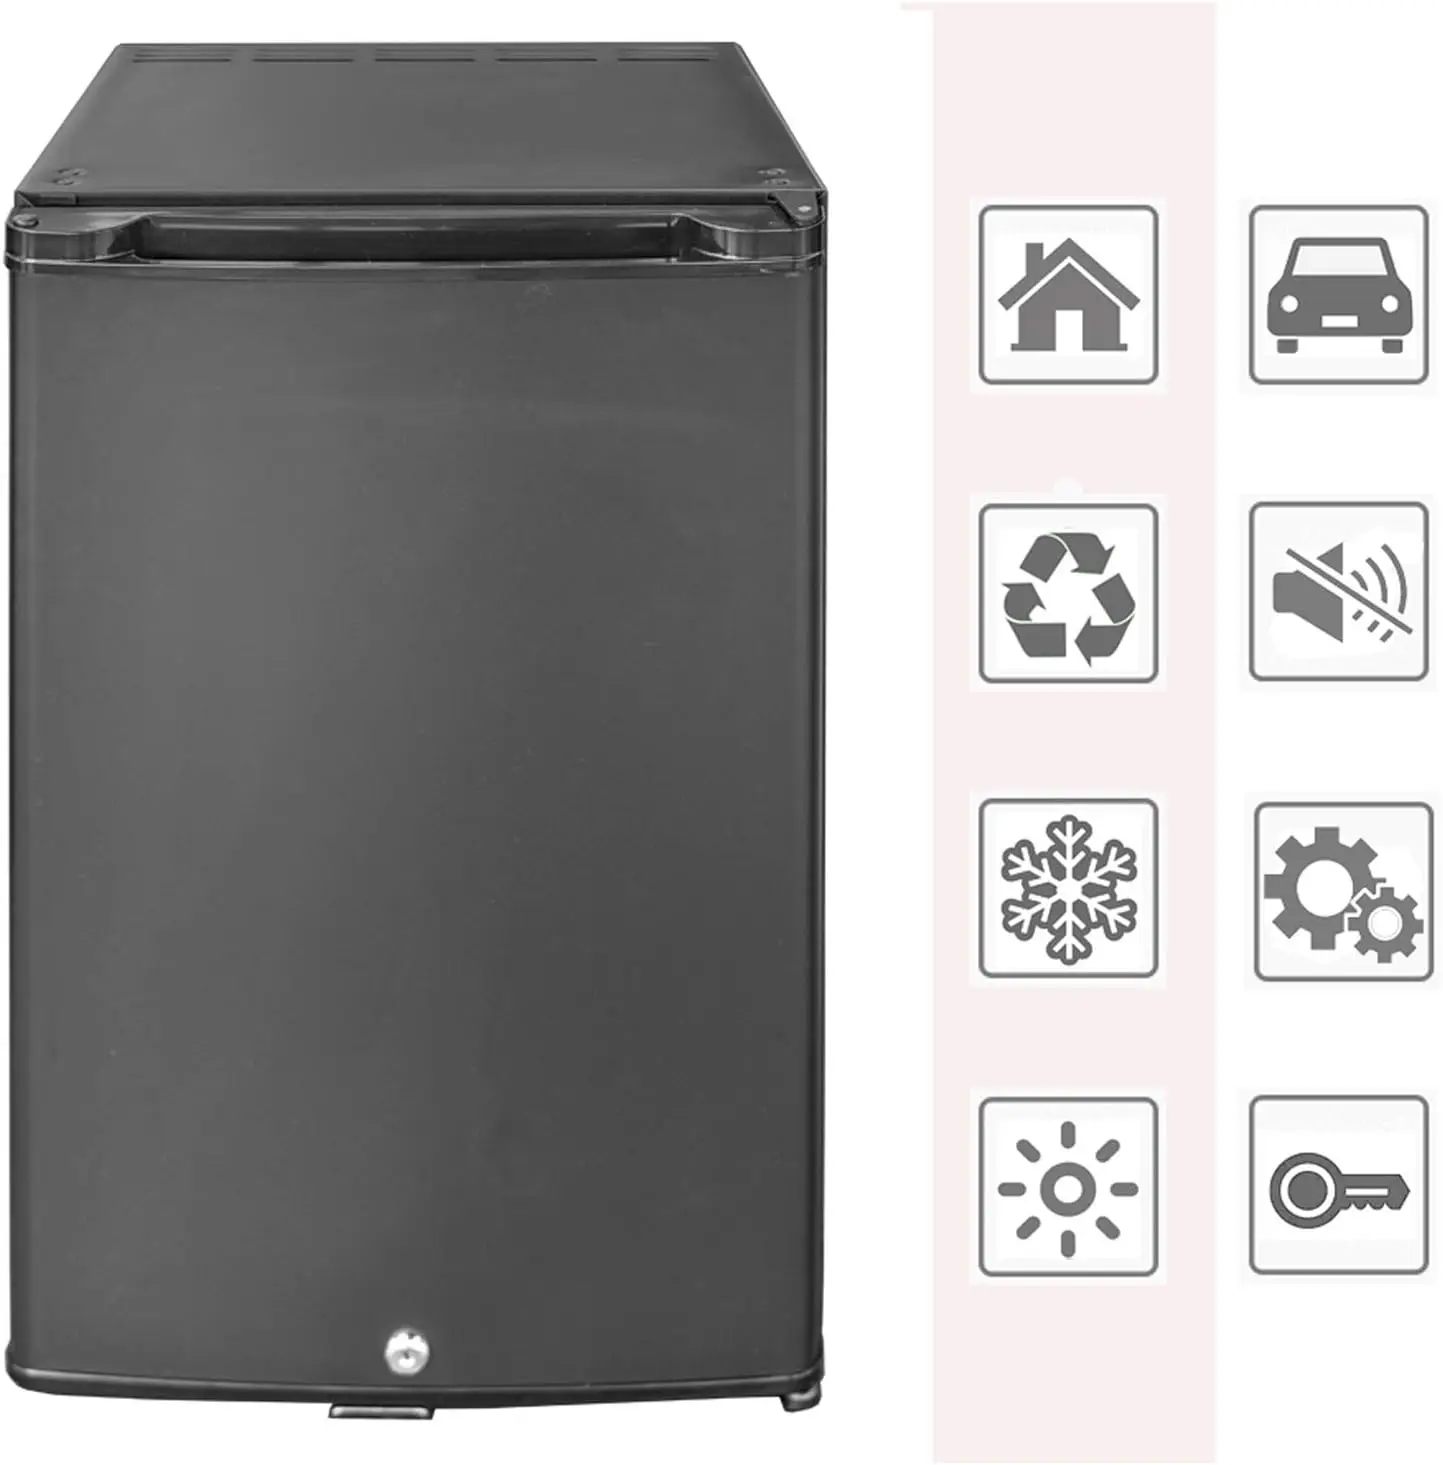 Quiet Compact Refrigerator With Lock Small Cooler 1.76 Cu. Ft Silent Hotel Mini Bar Zero Noise Absorption Fridge For